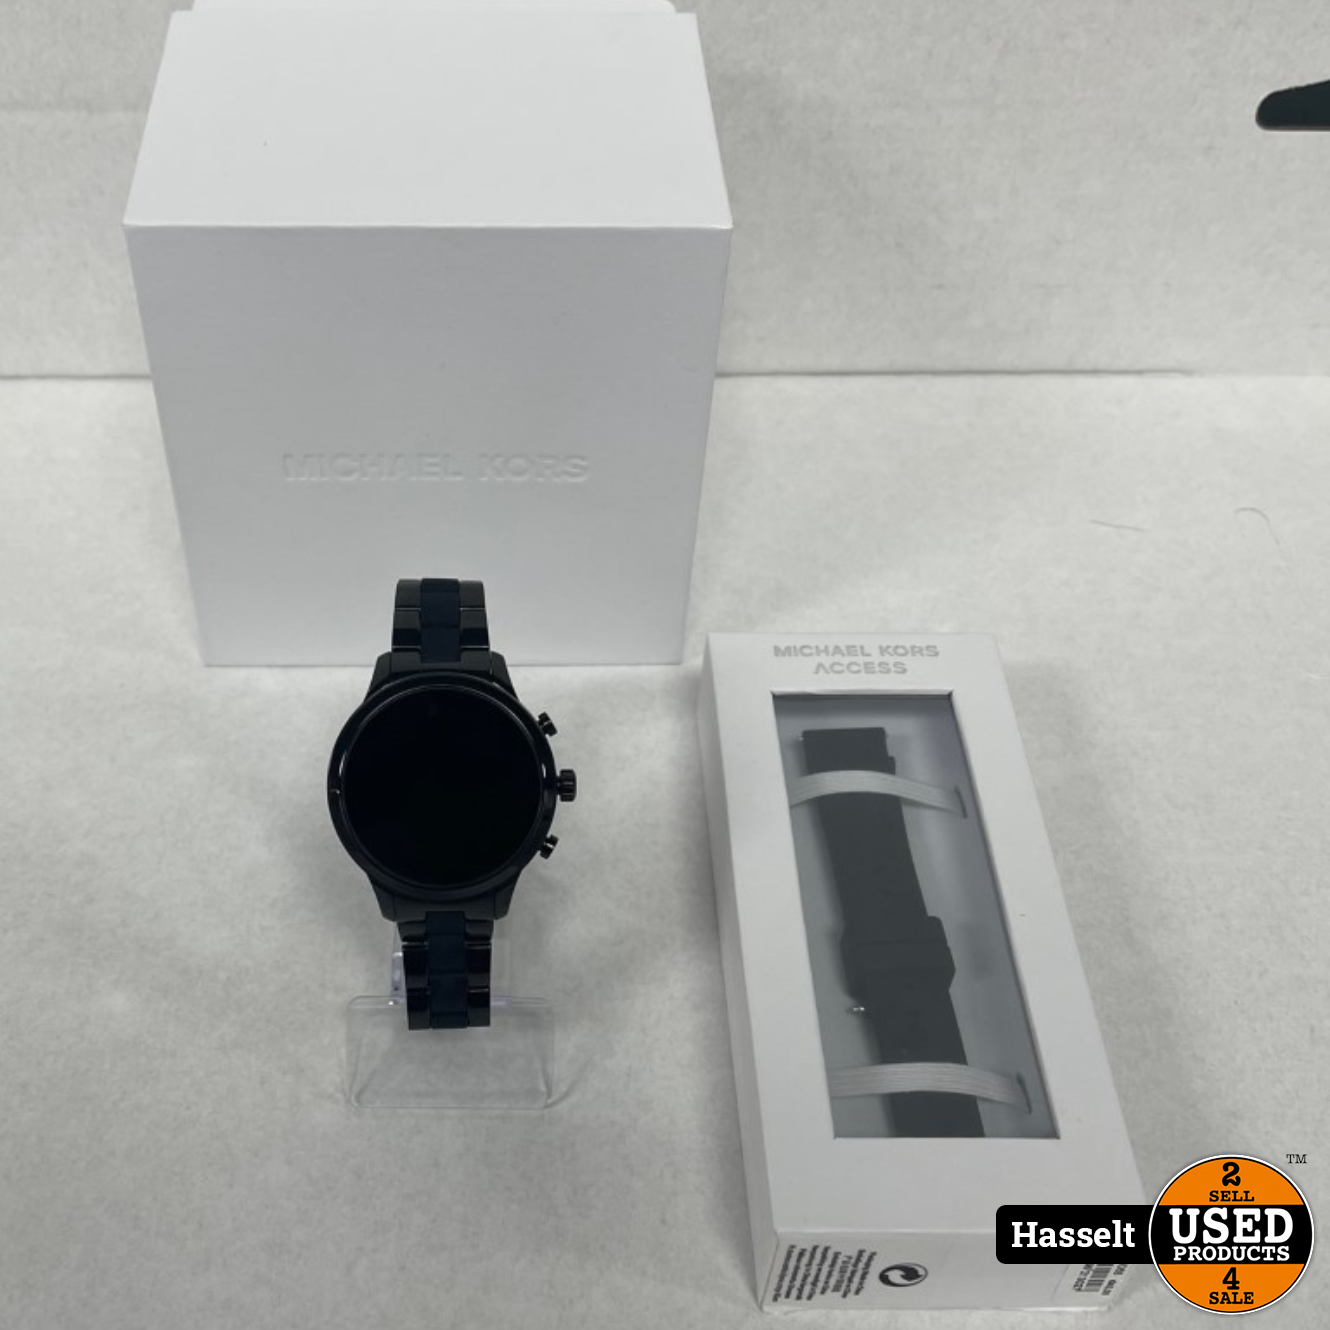 Michael Kors DW7M1 Smartwatch - Used Products Hasselt